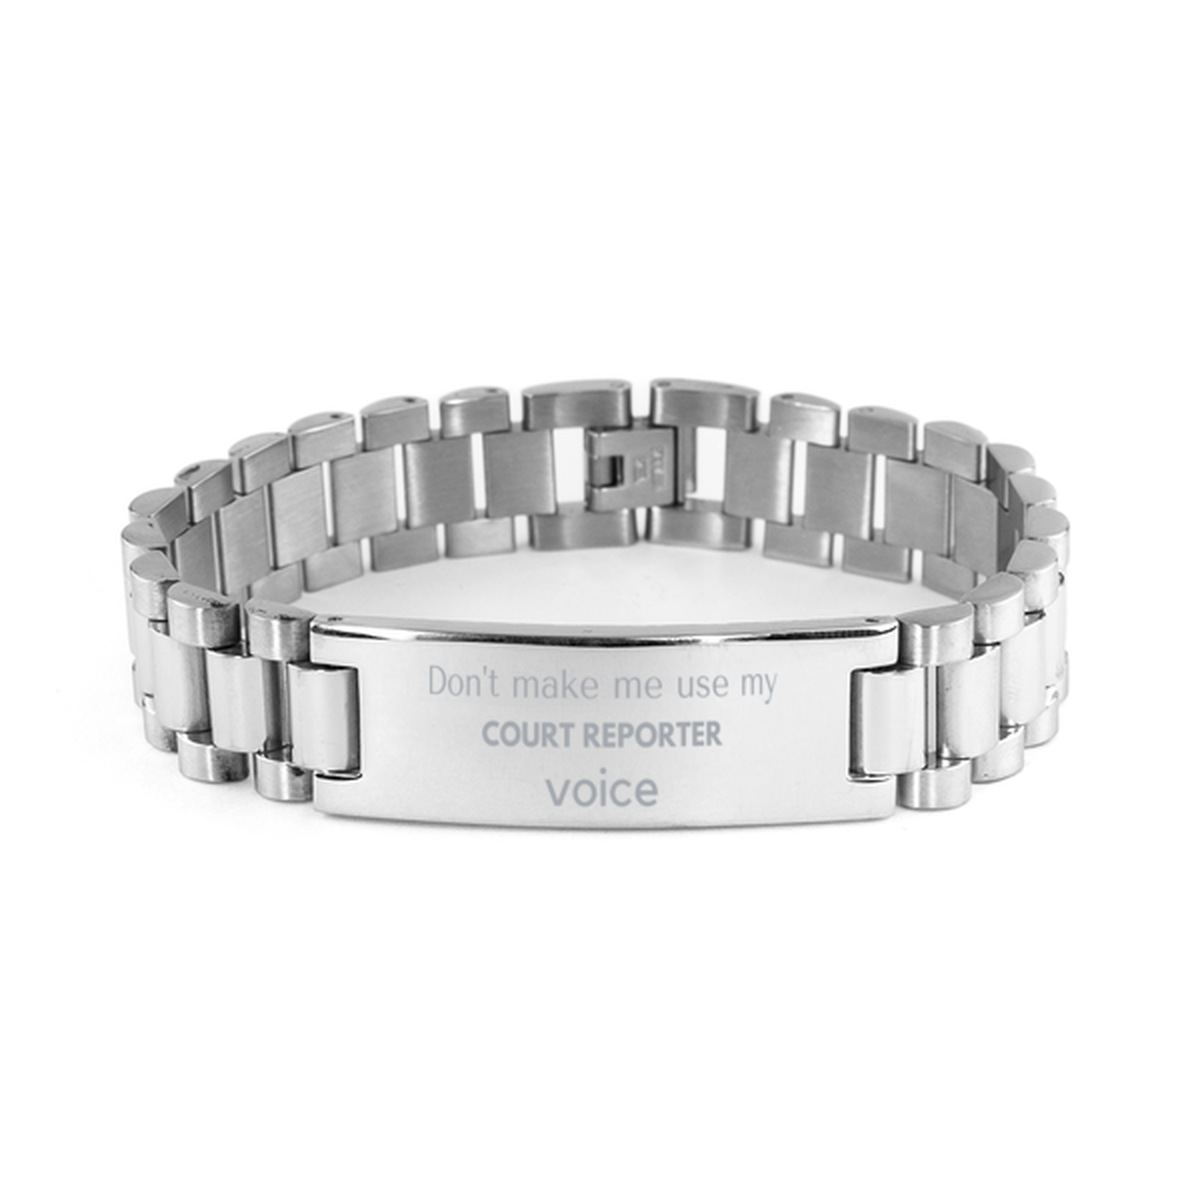 Don't make me use my Court Reporter voice, Sarcasm Court Reporter Gifts, Christmas Court Reporter Ladder Stainless Steel Bracelet Birthday Unique Gifts For Court Reporter Coworkers, Men, Women, Colleague, Friends